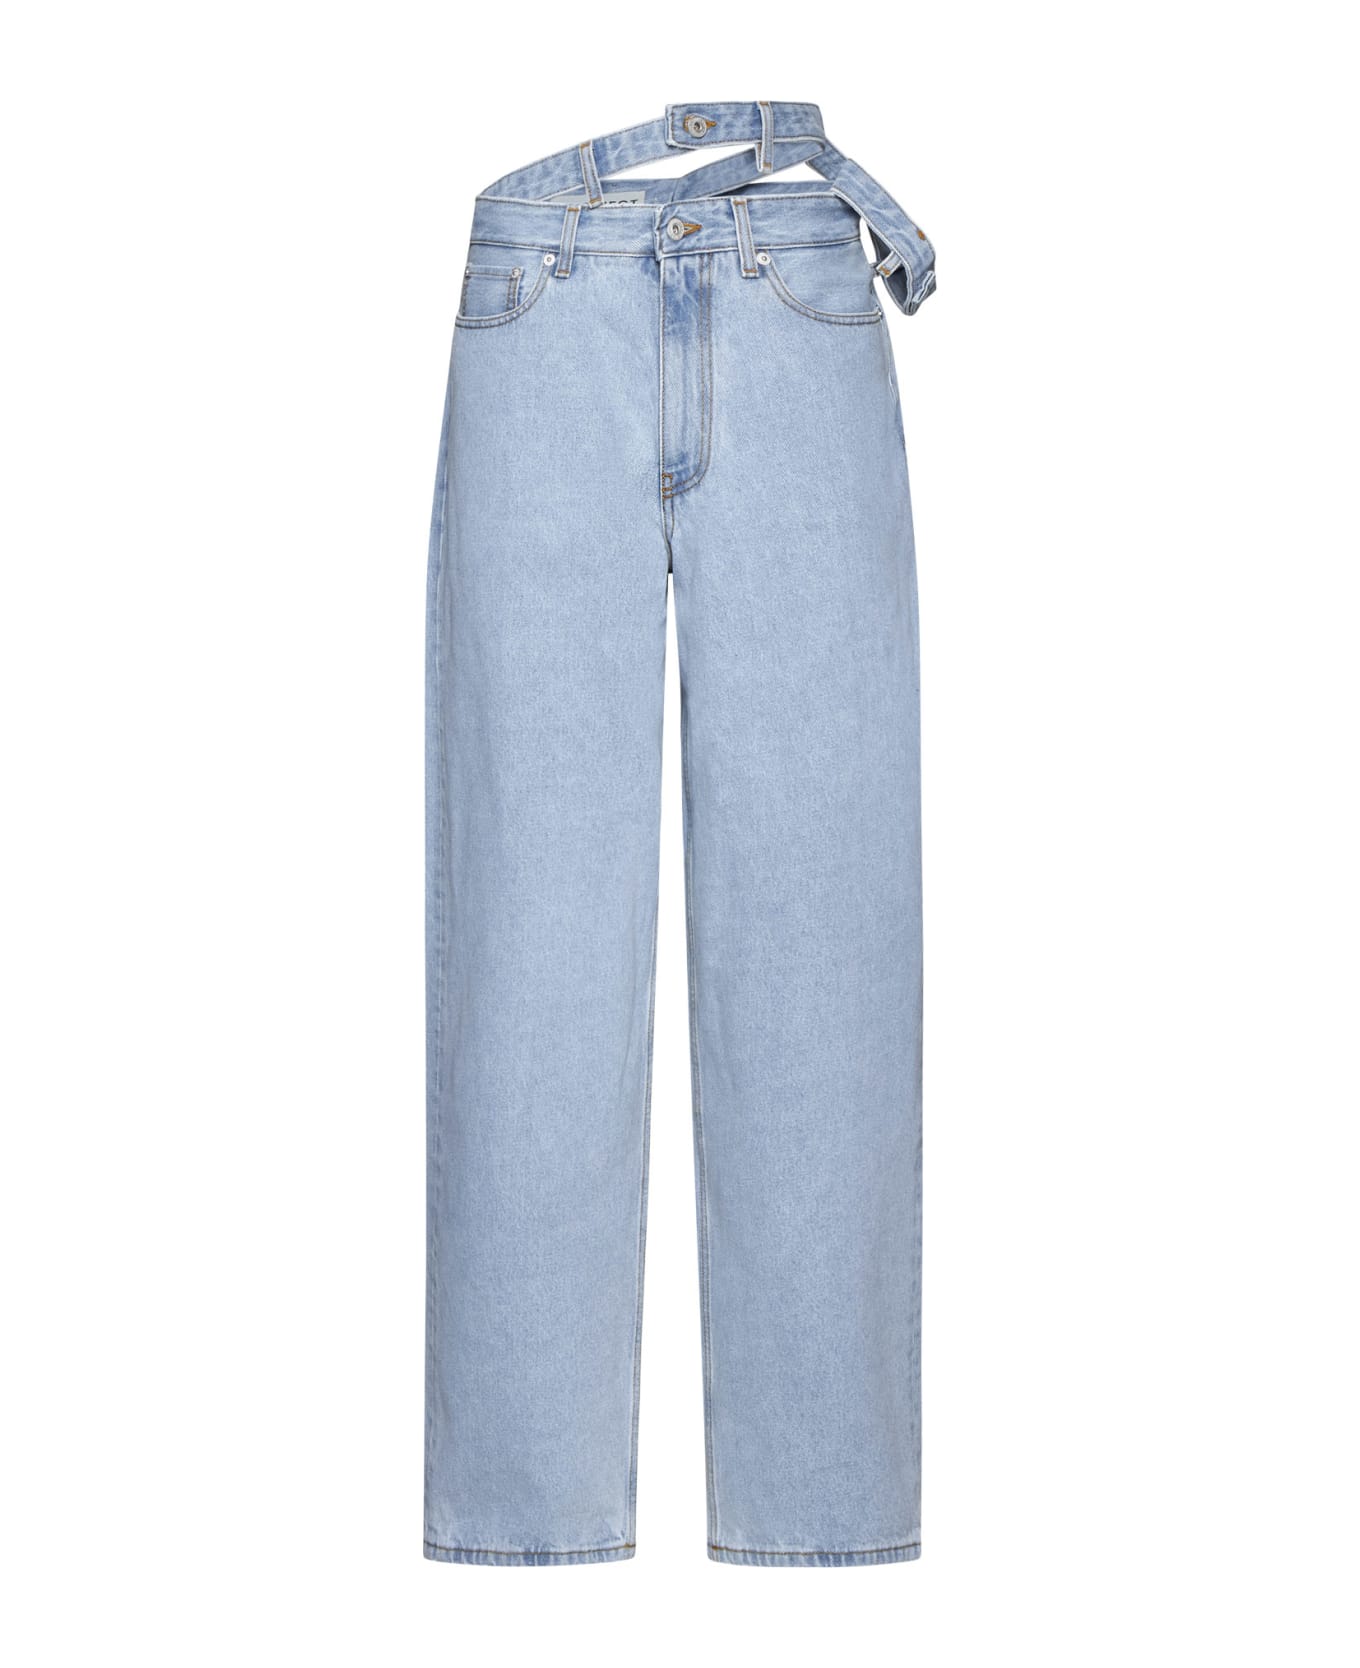 Y/Project Jeans - Evergreen ice blue